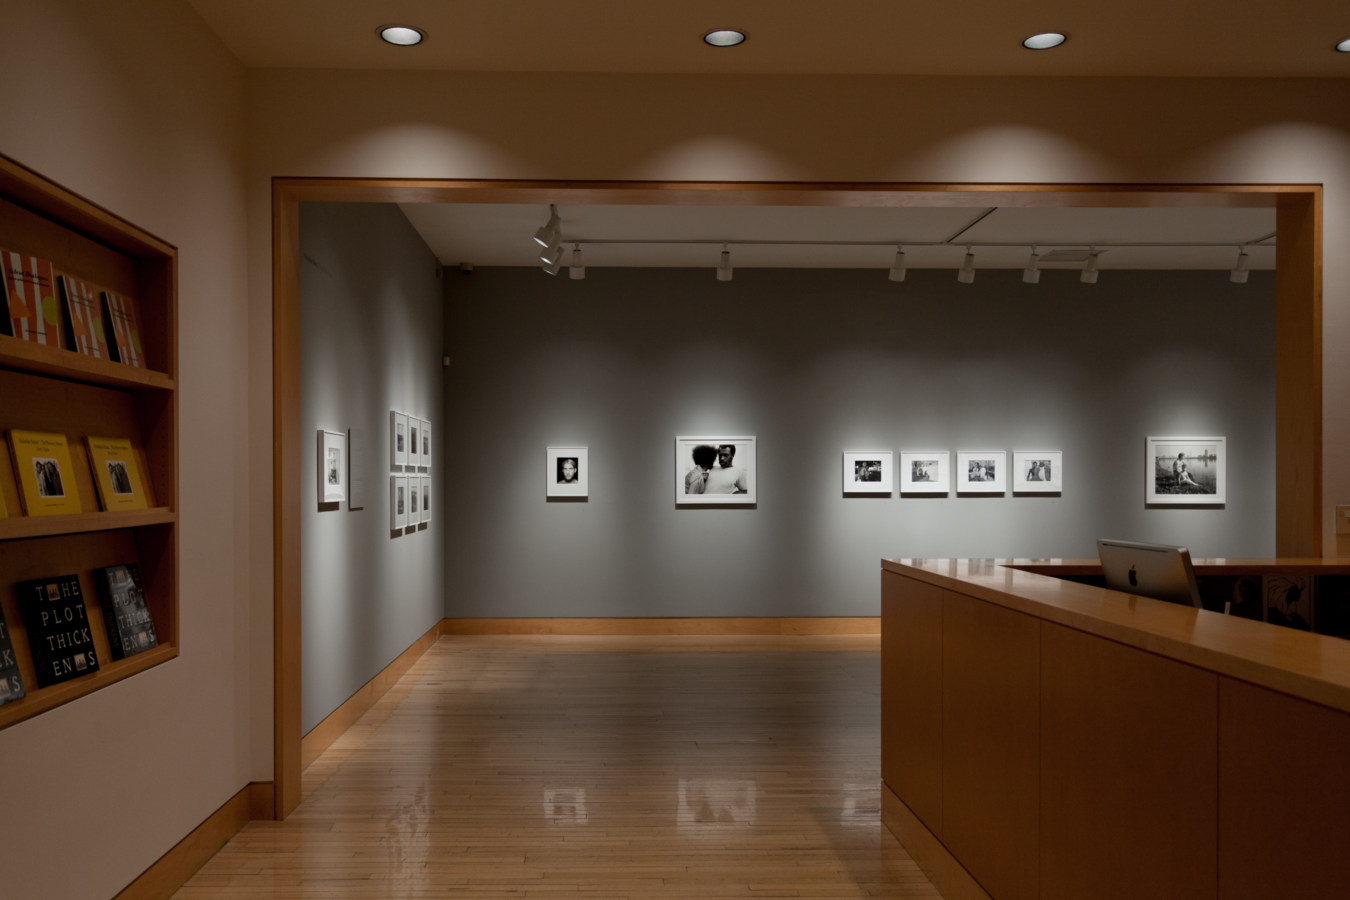 Color image of gallery entryway exhibiting black and white photographs on grey gallery walls